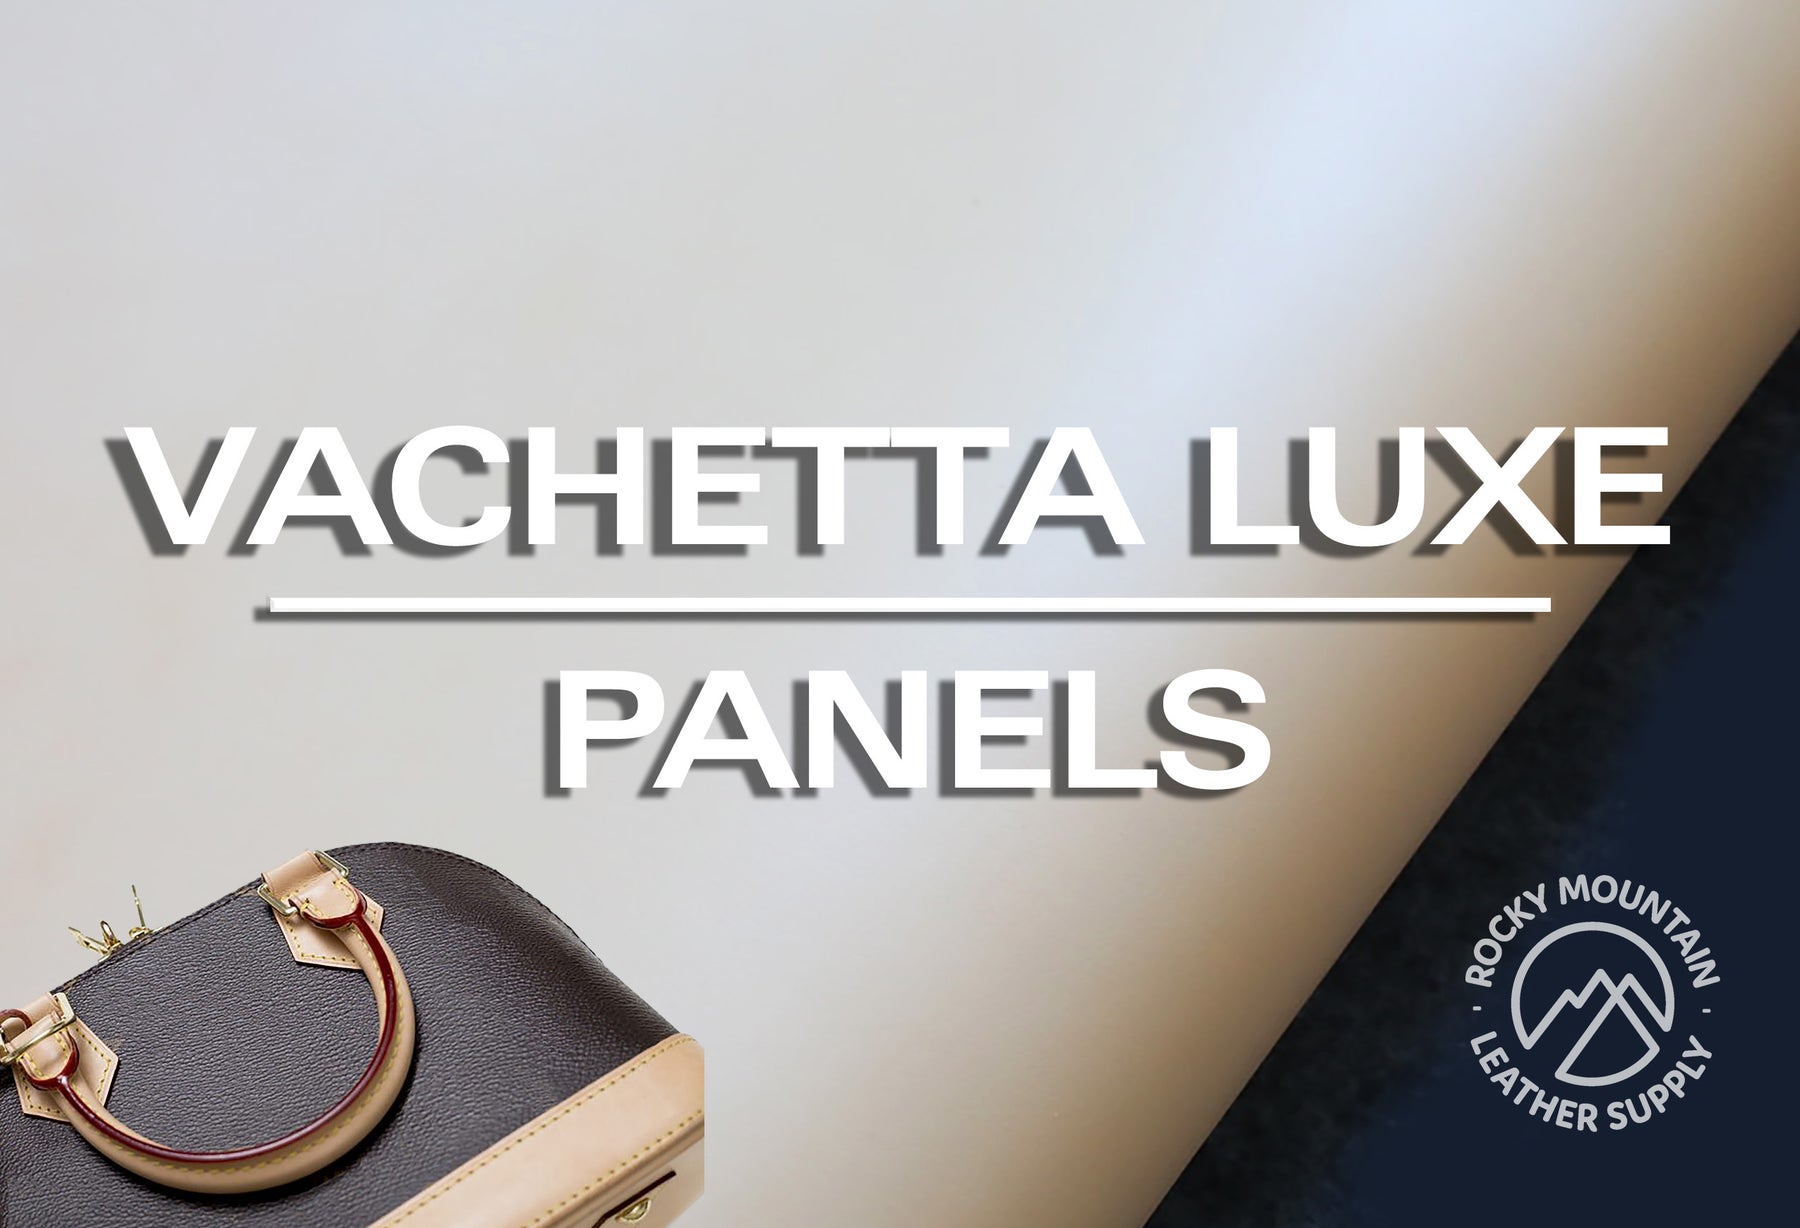 Vachetta leather - Everything you need to know!